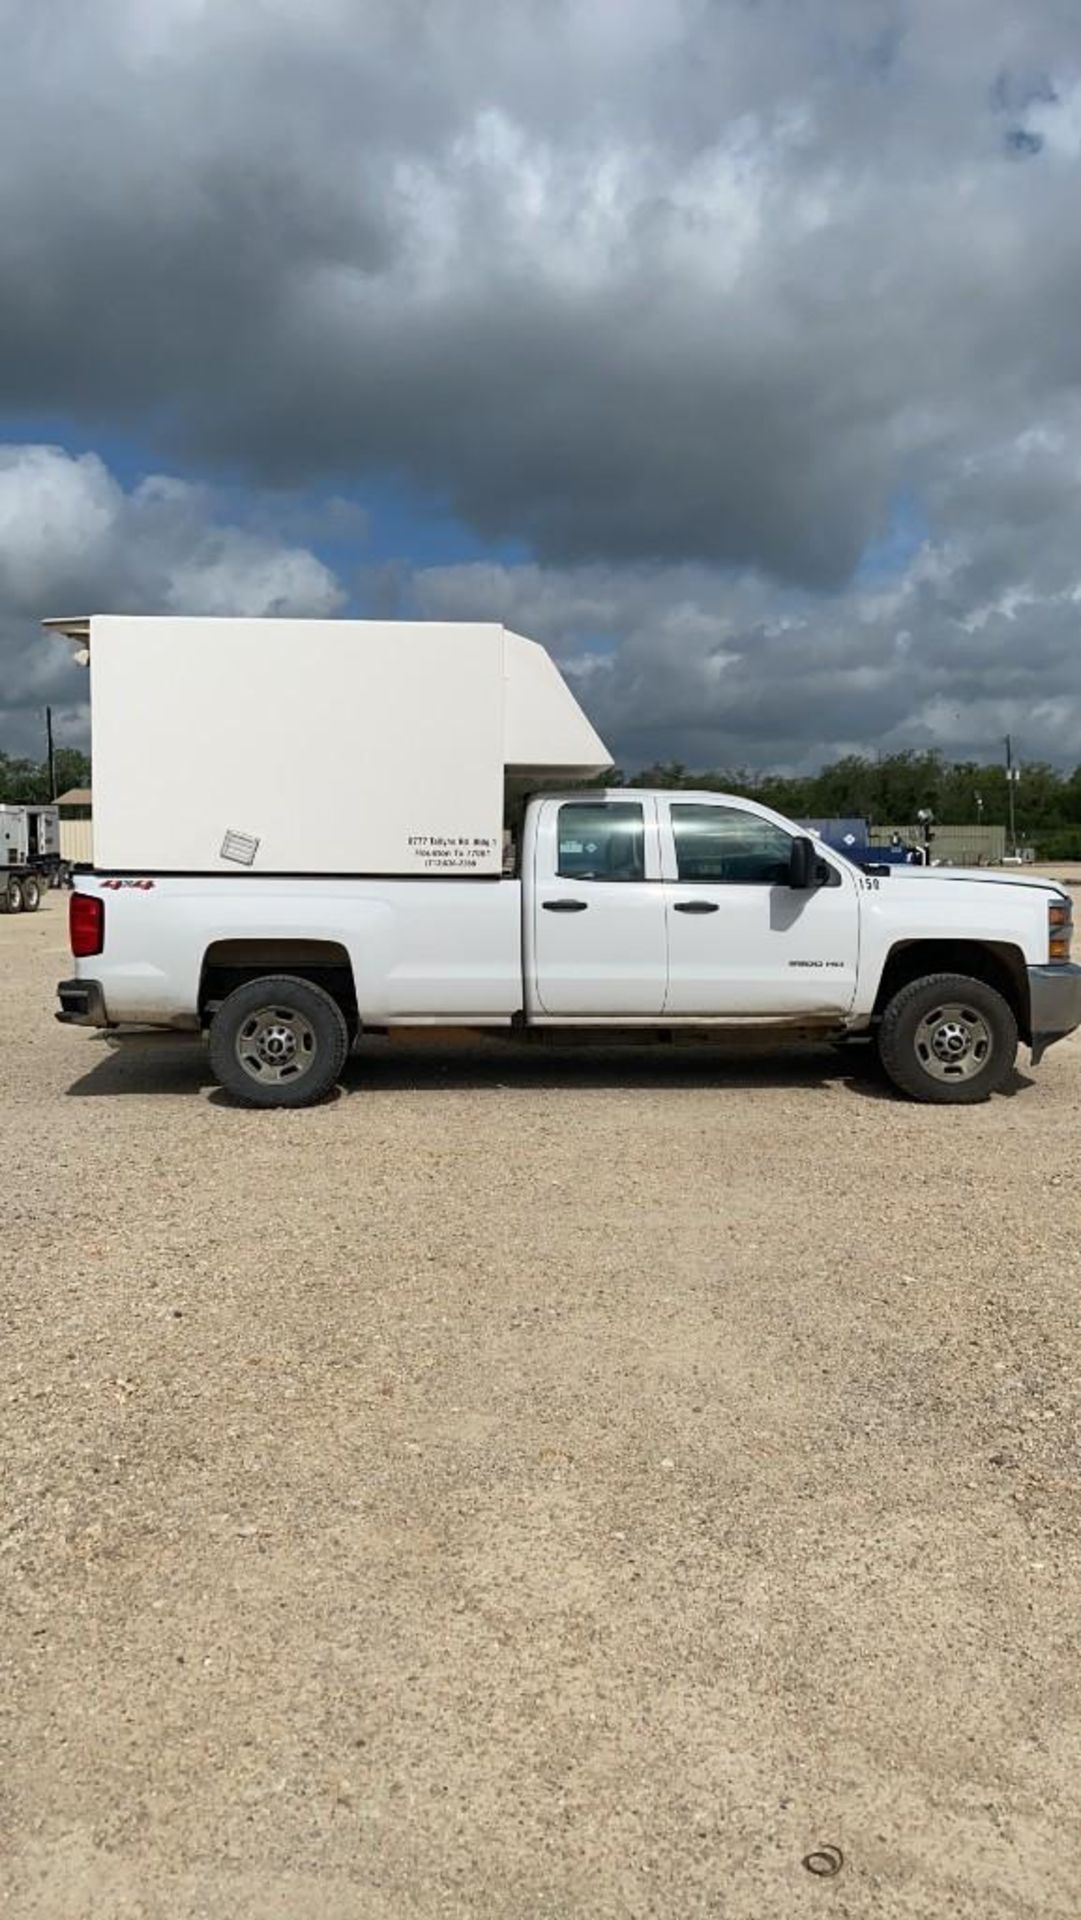 2018 CHEVY 2500 HD PICKUP TRUCK, 4WD, GASOLINE POWERED, 8' BED, 96,959 MILES, DARKROOM NOT INCLUDED - Image 4 of 8